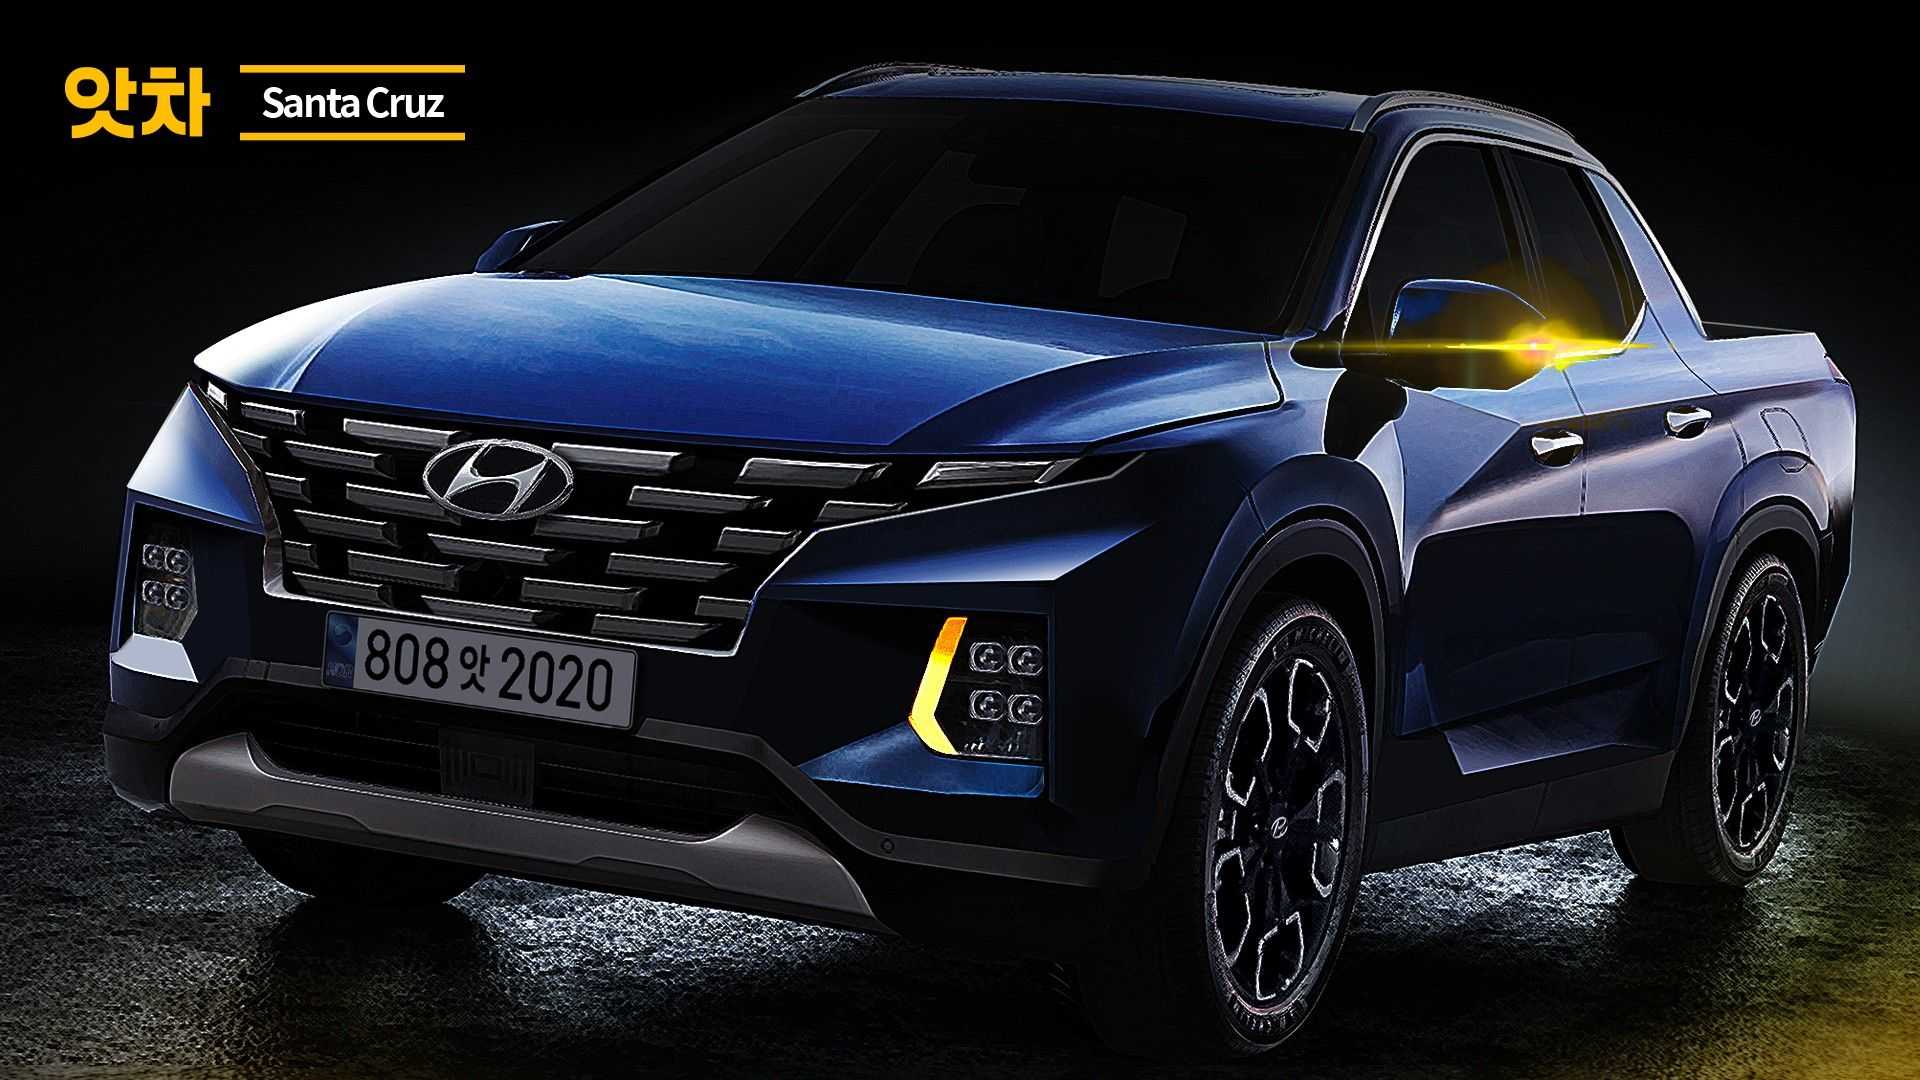 Check out the Entire Hyundai Santa Cruz Color Palette in New Render